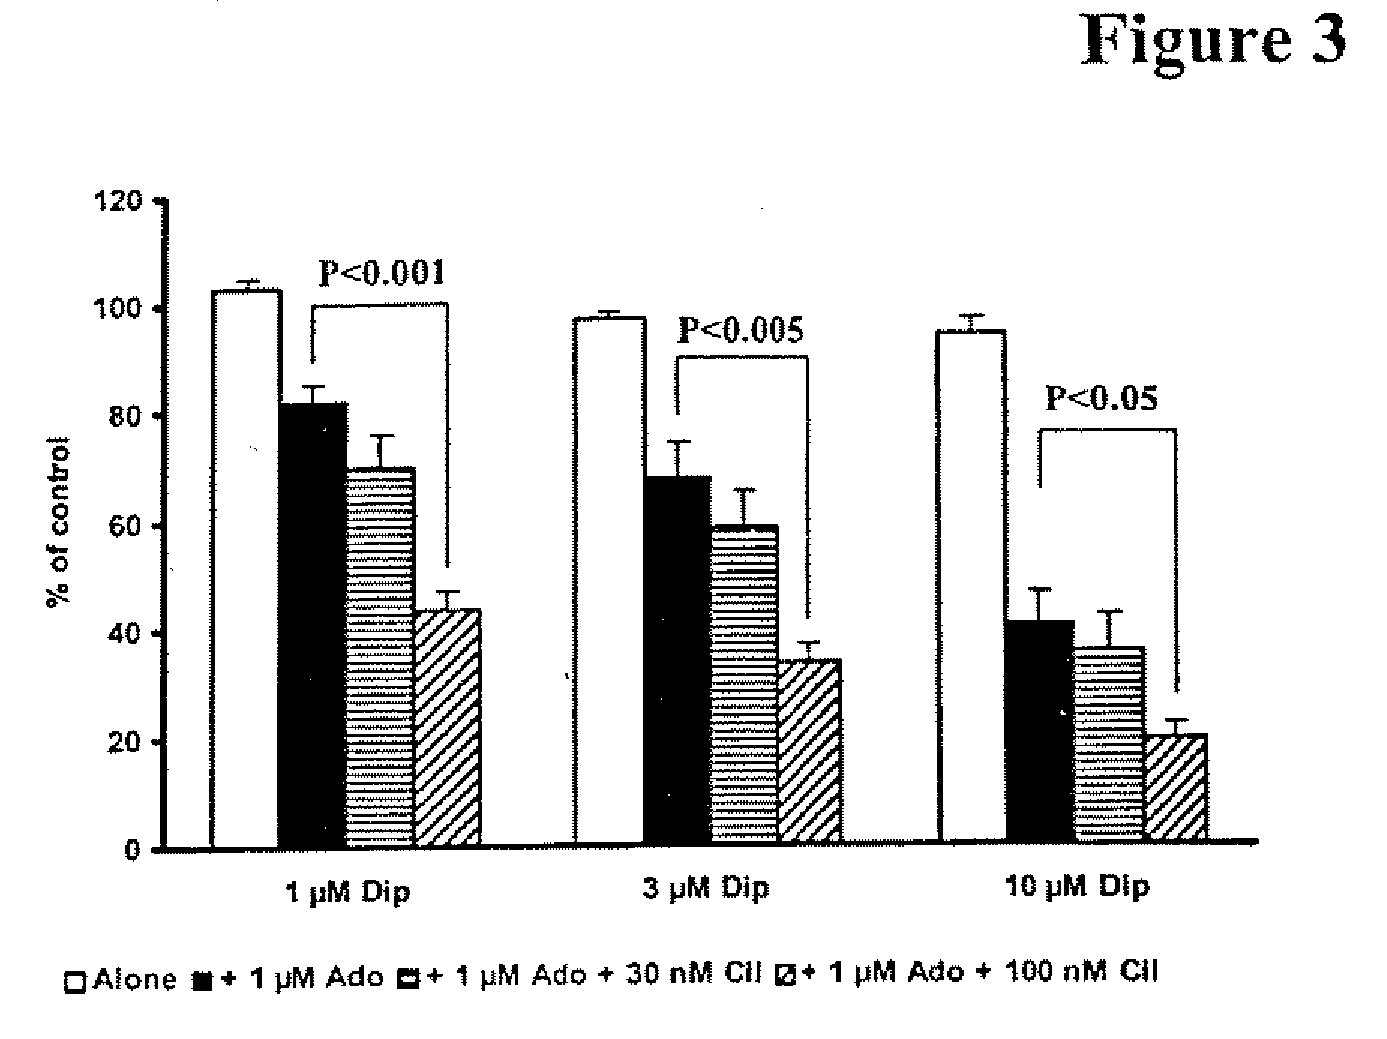 Pharmaceutical Compositions Comprising A Multifunctional Phosphodiesterase Inhibitor and An Adenosine Uptake Inhibitor